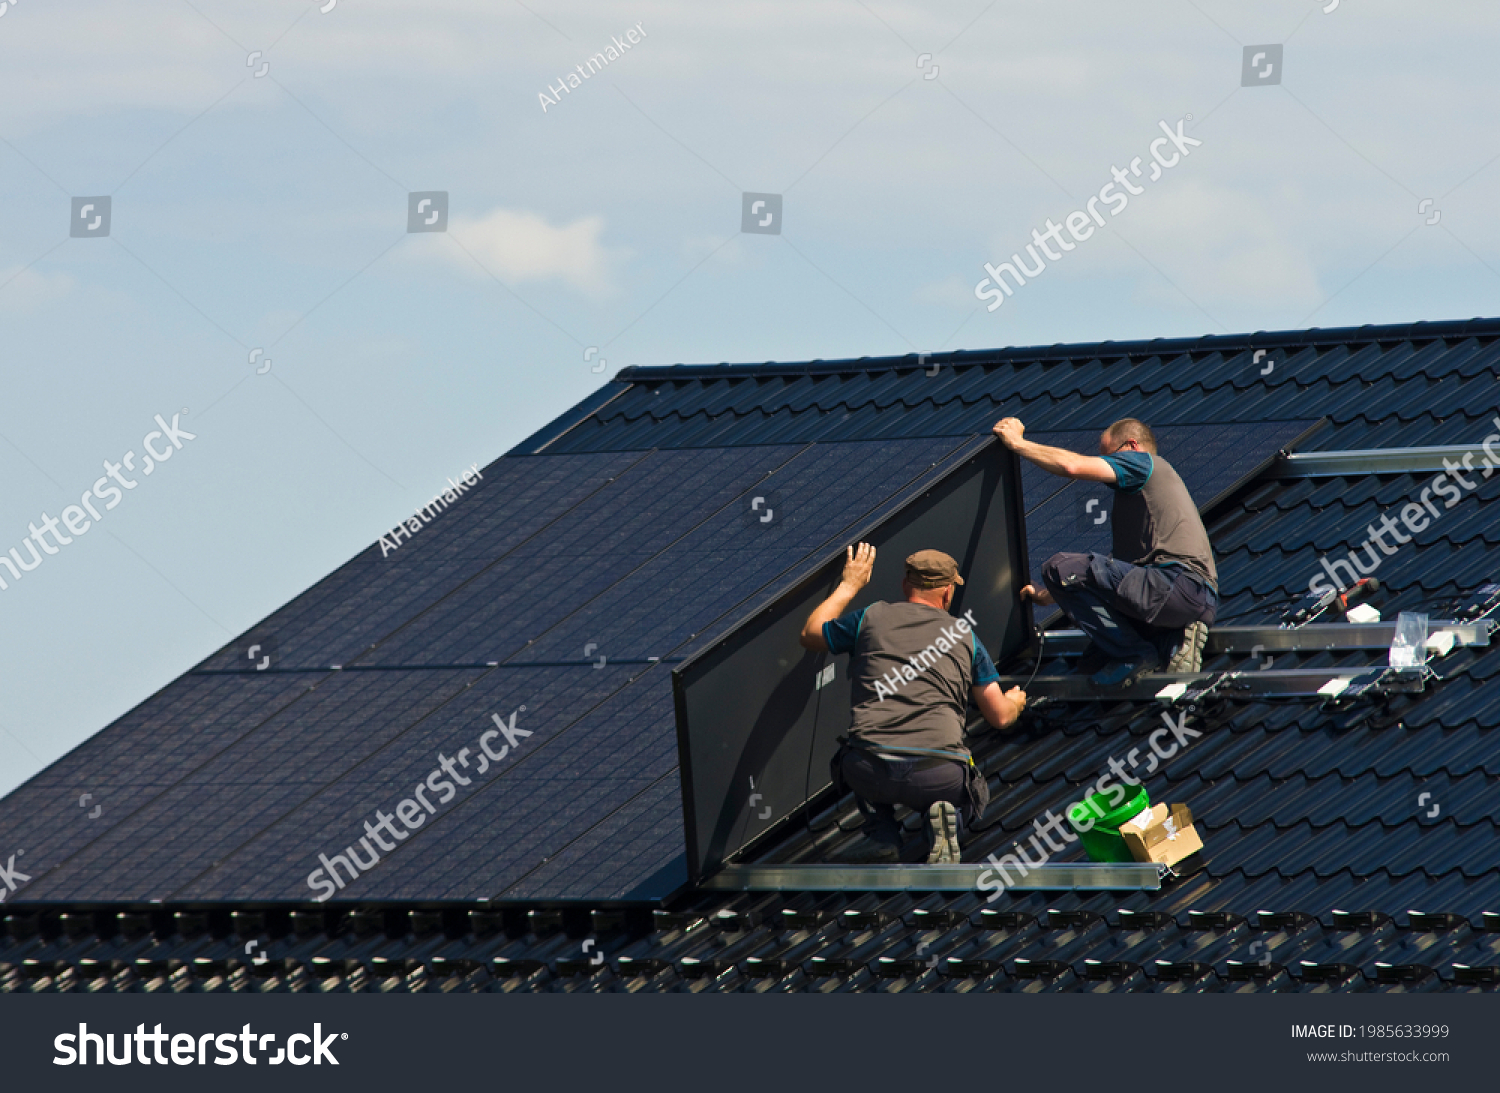 Installing new black solar panels on the metal roof of a private house. Ecology, renewable energy and green sustainable source of power abstract. #1985633999